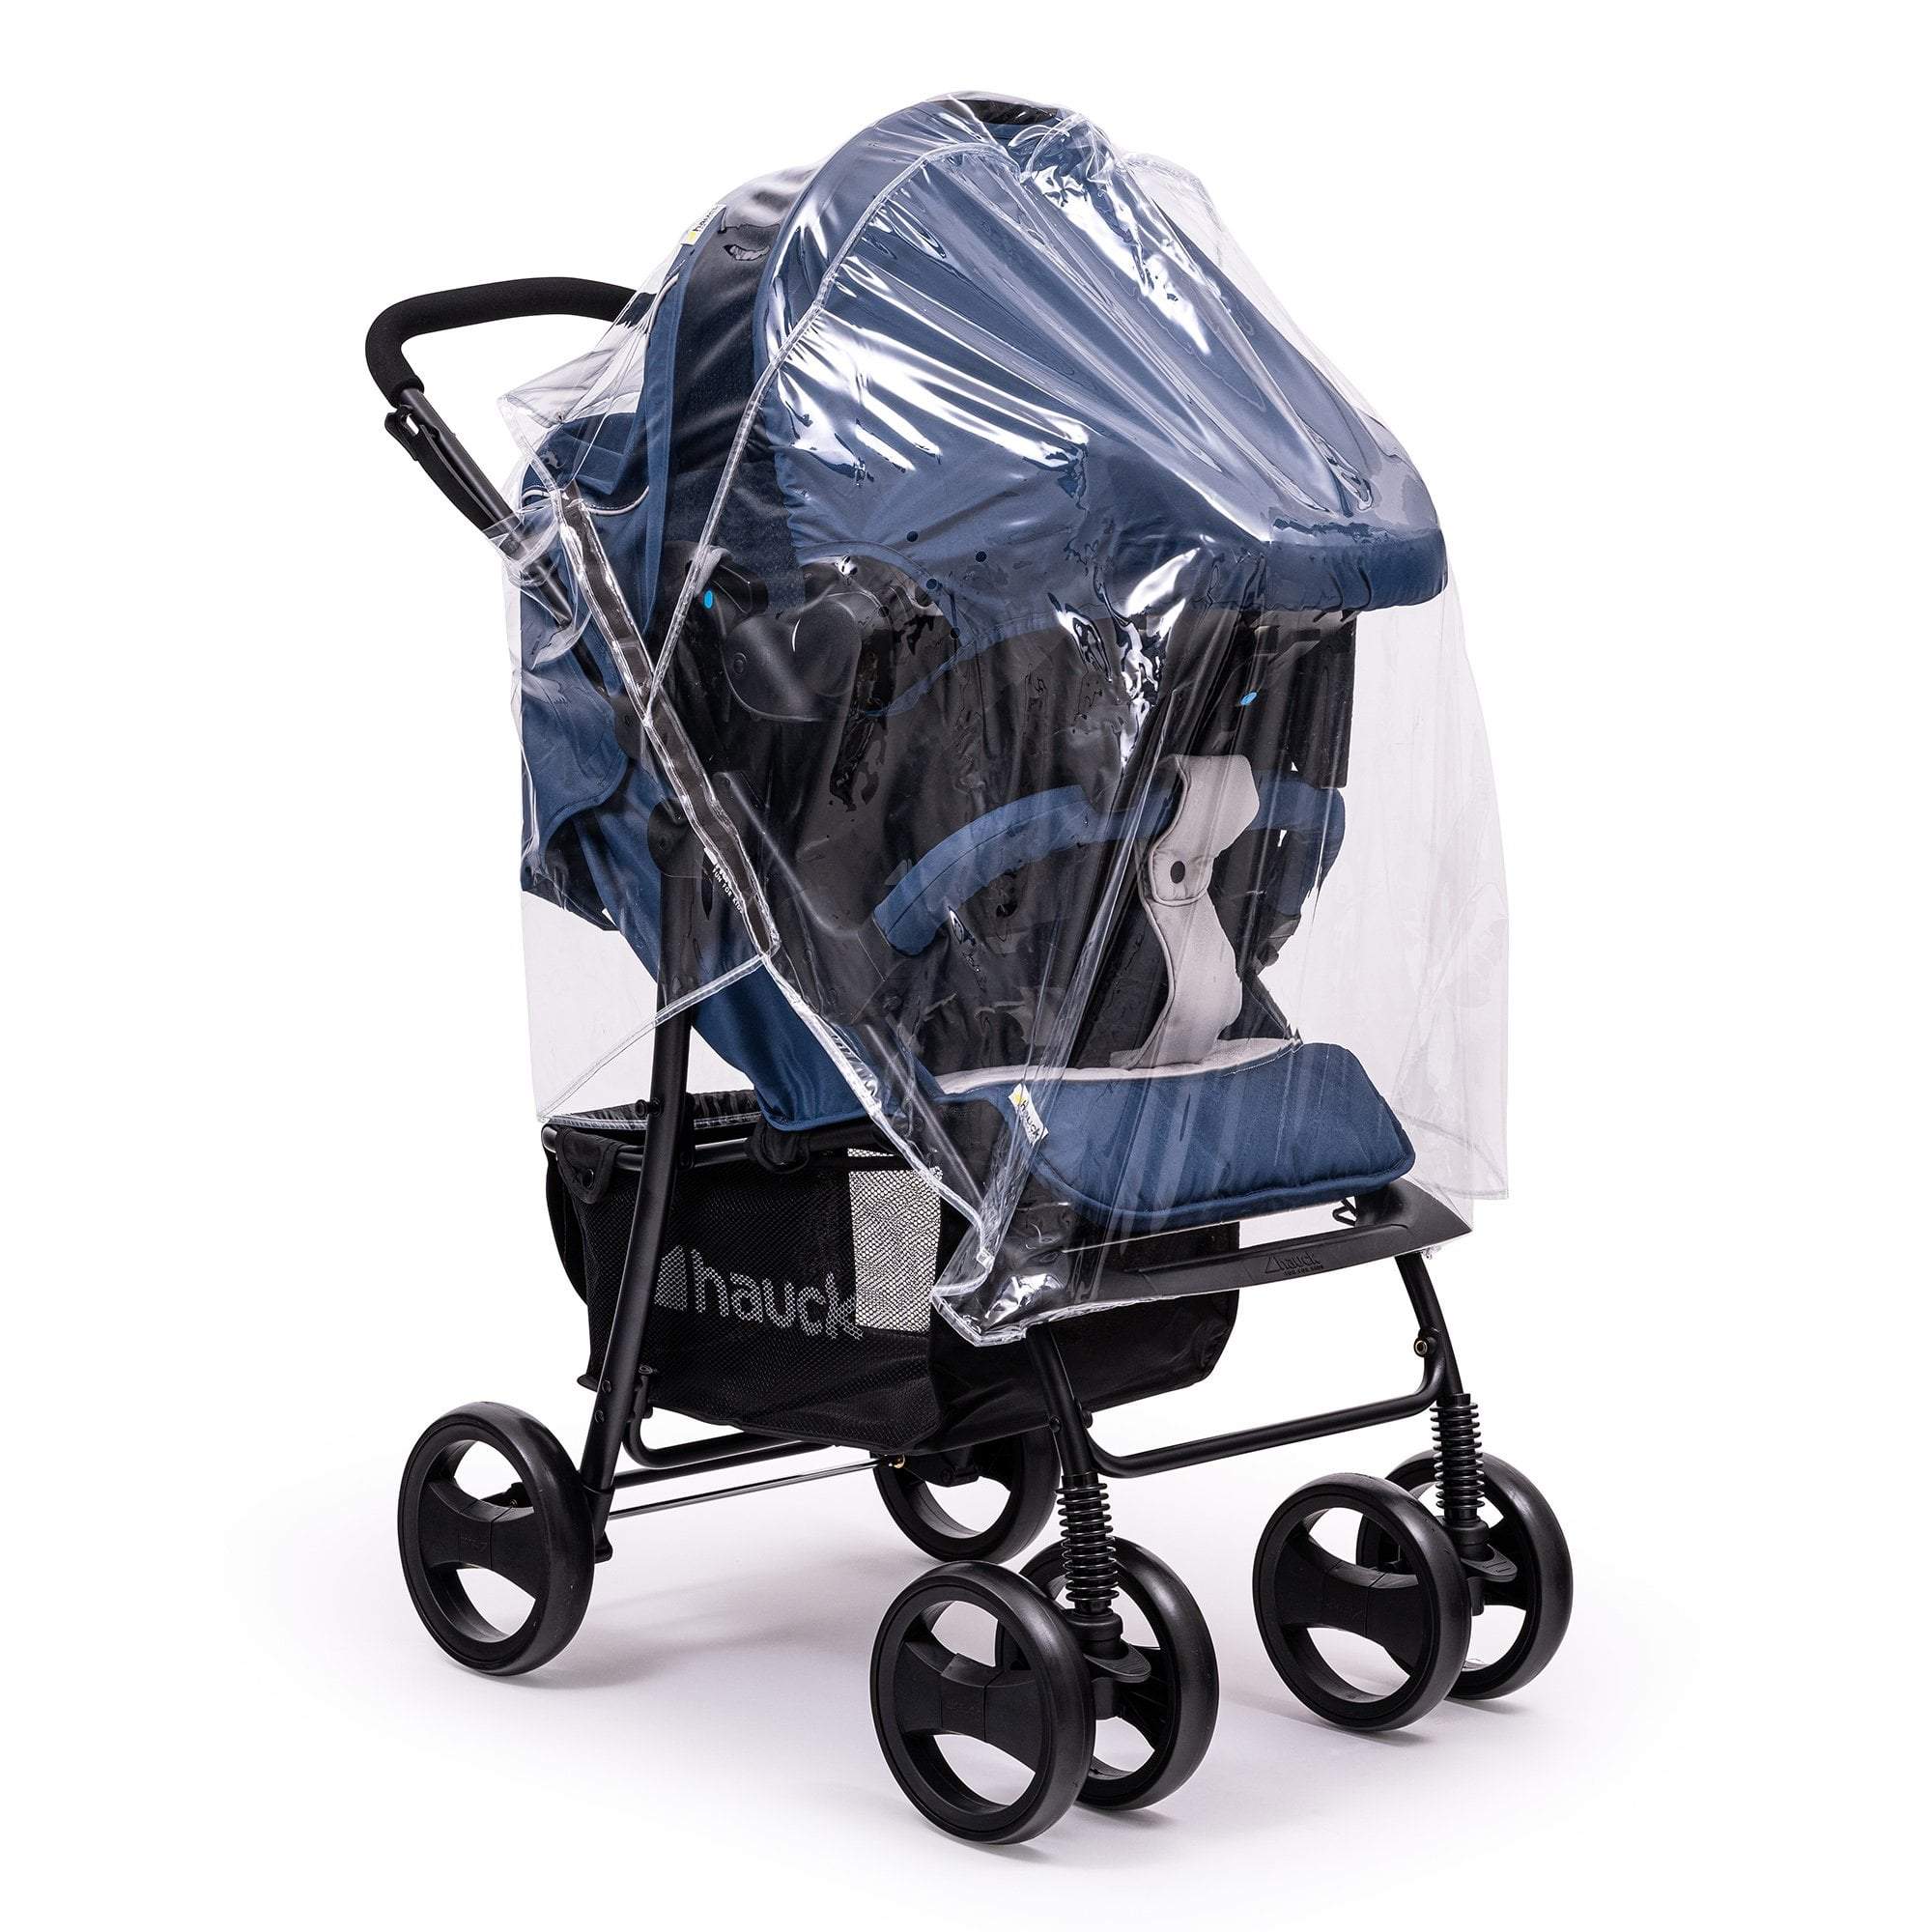 Travel System Raincover Compatible with Baby Jogger - Fits All Models - For Your Little One